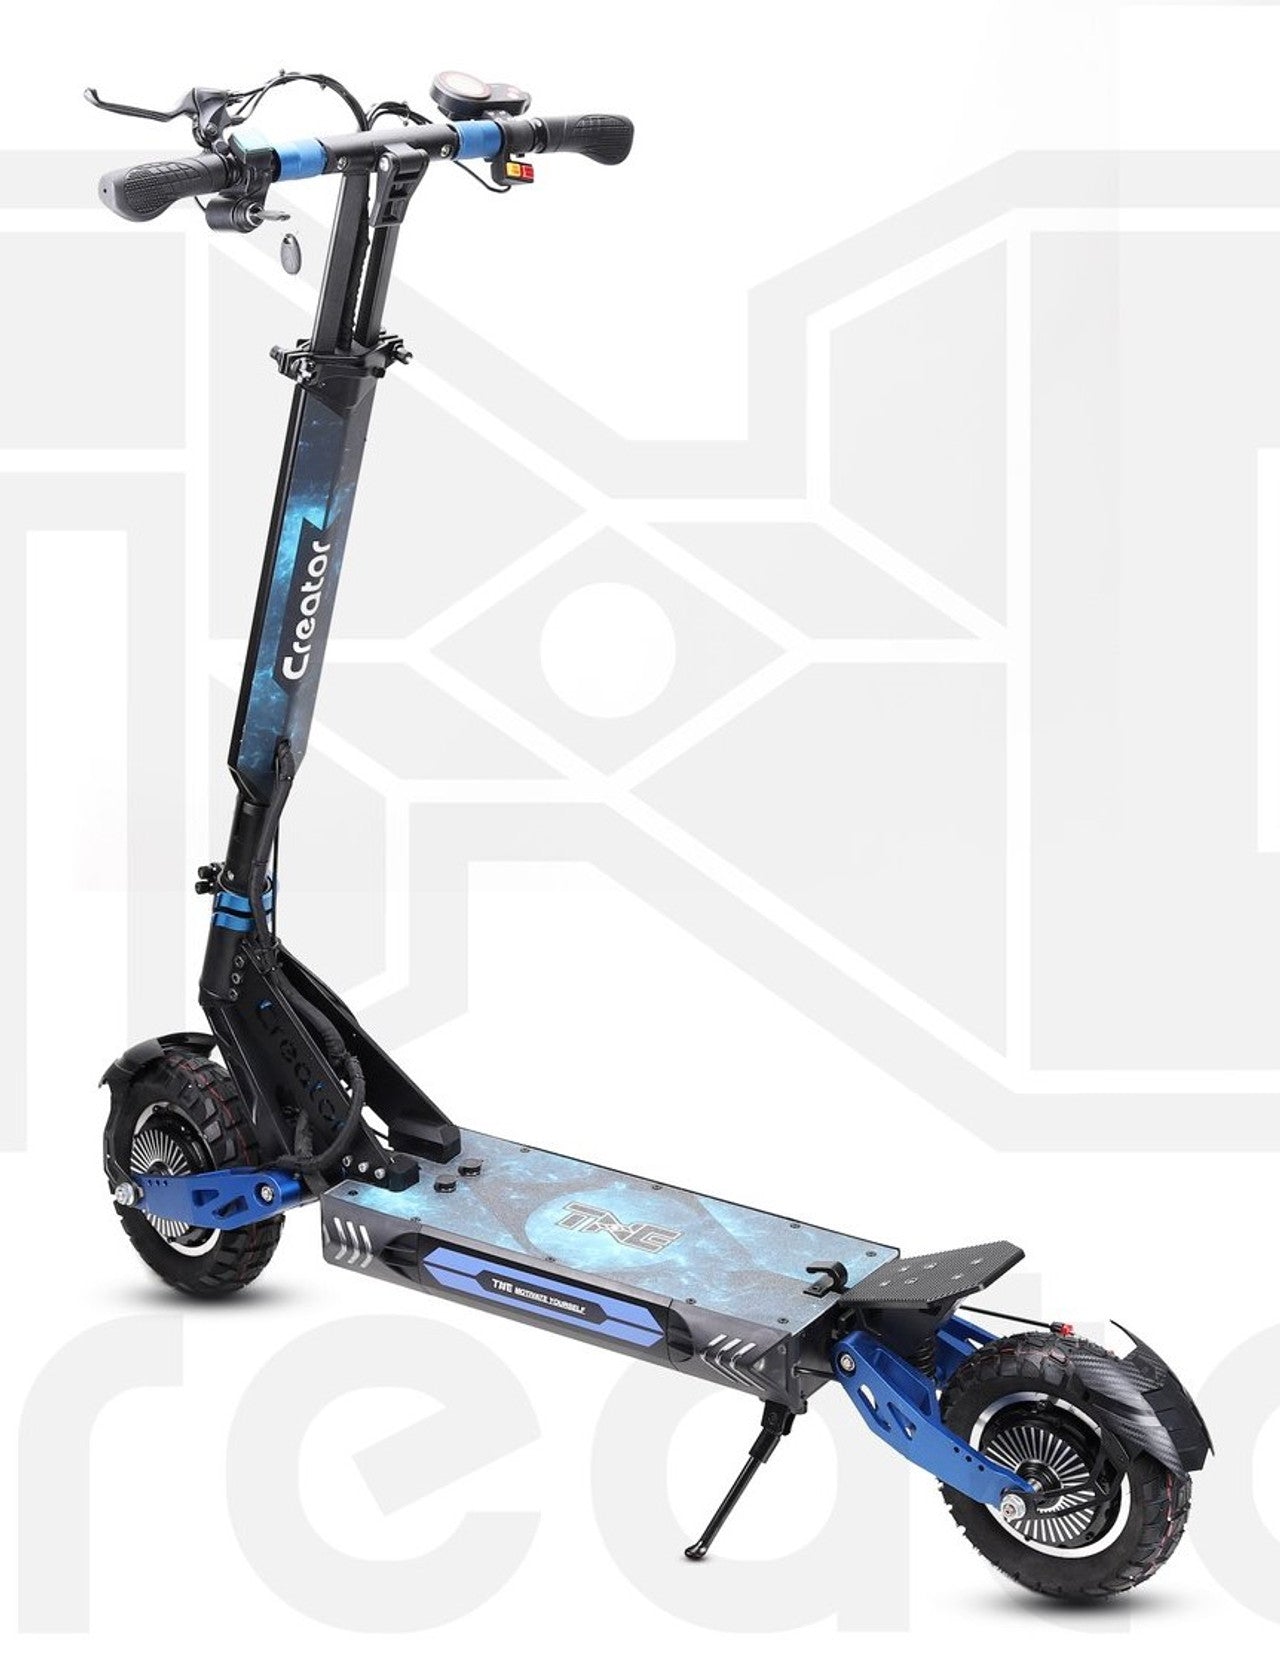 NEW! 202 3 T-2000 V60 2400w 60v Lithium 21ah Electric Scooter (Blue)